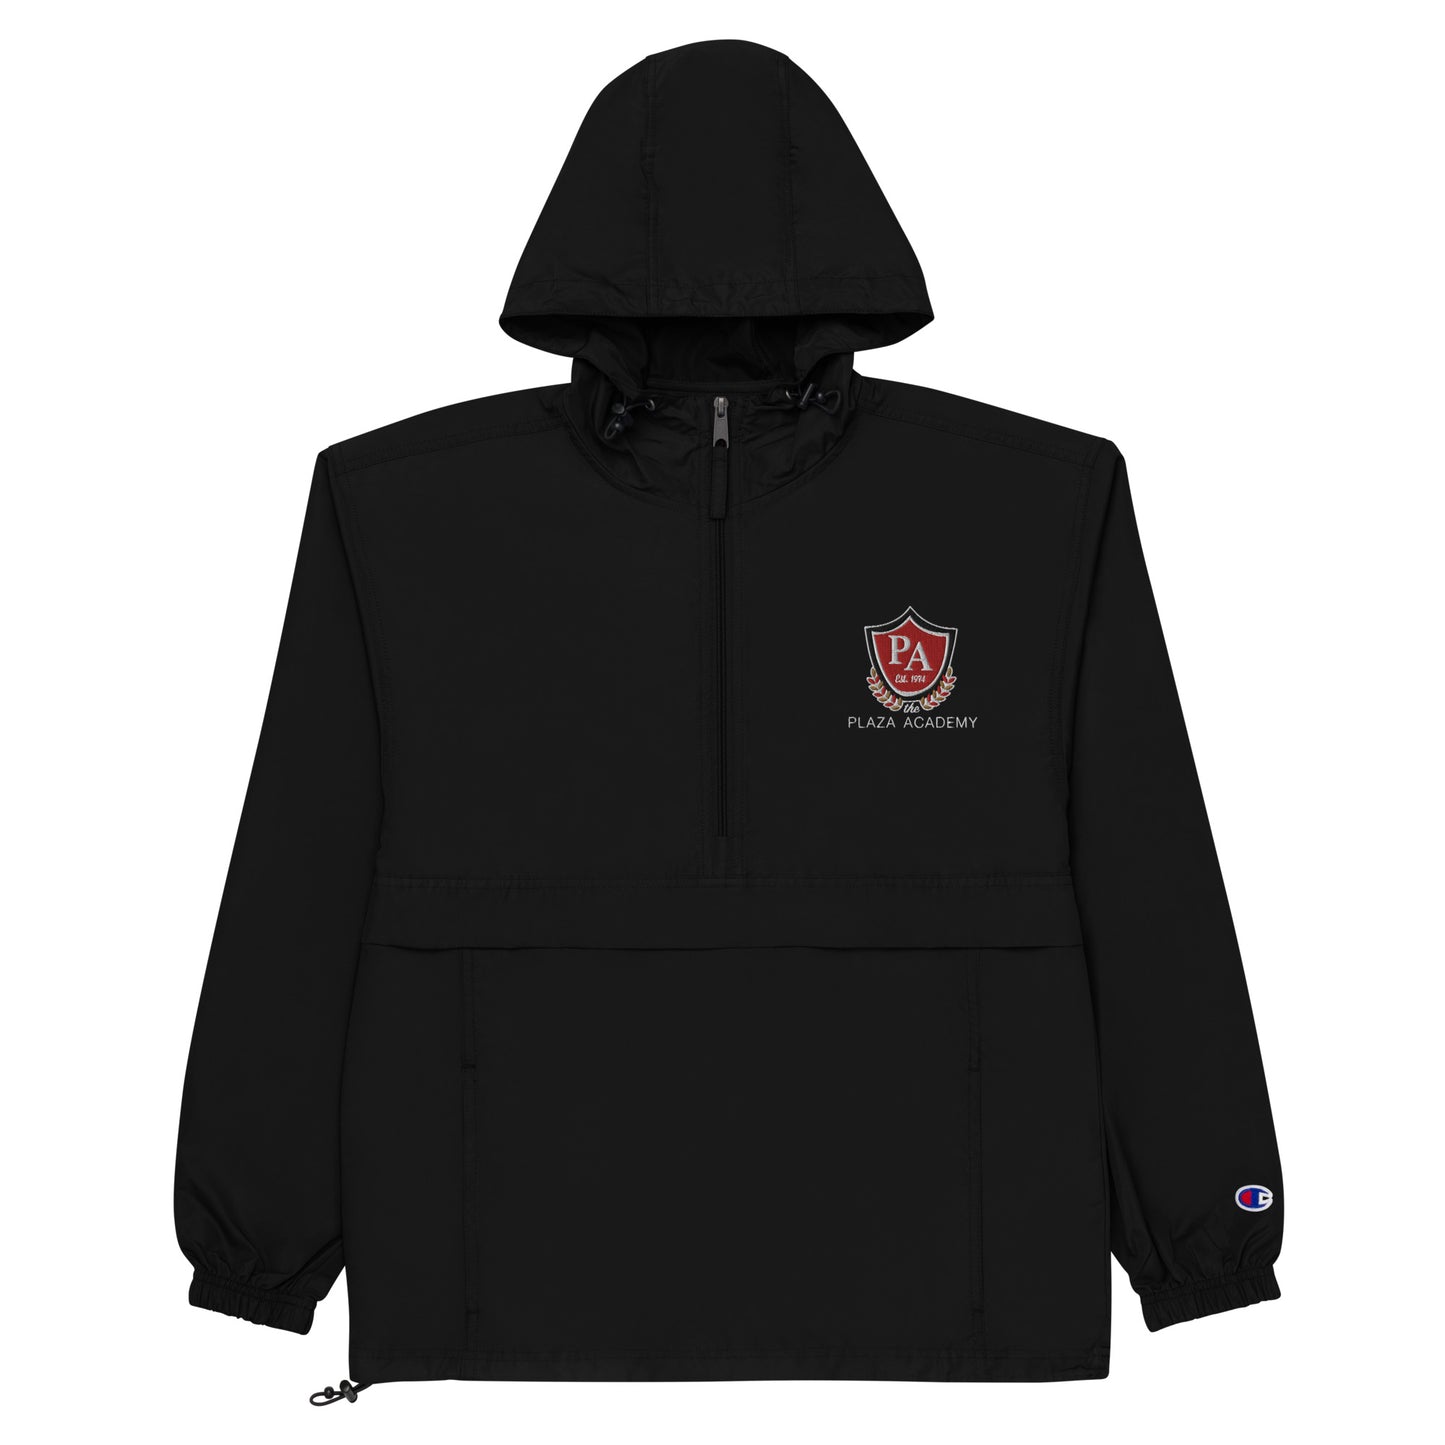 Plaza Academy Embroidered Champion Packable Jacket